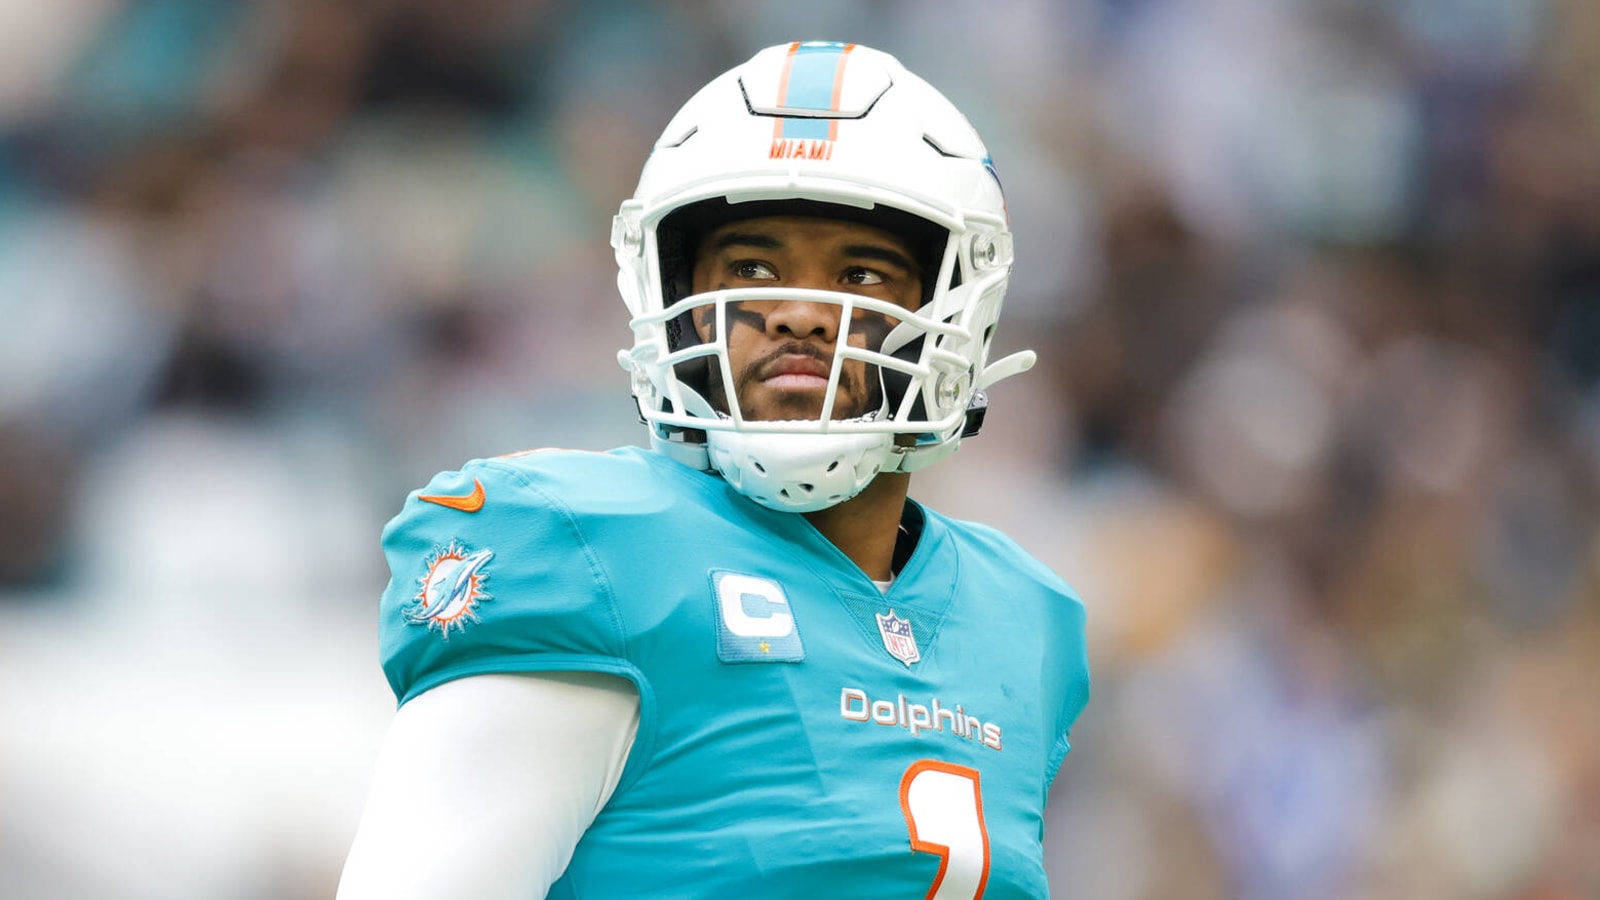 Bill Parcells uncertain Dolphins have 'stability' at QB with Tua Tagovailoa